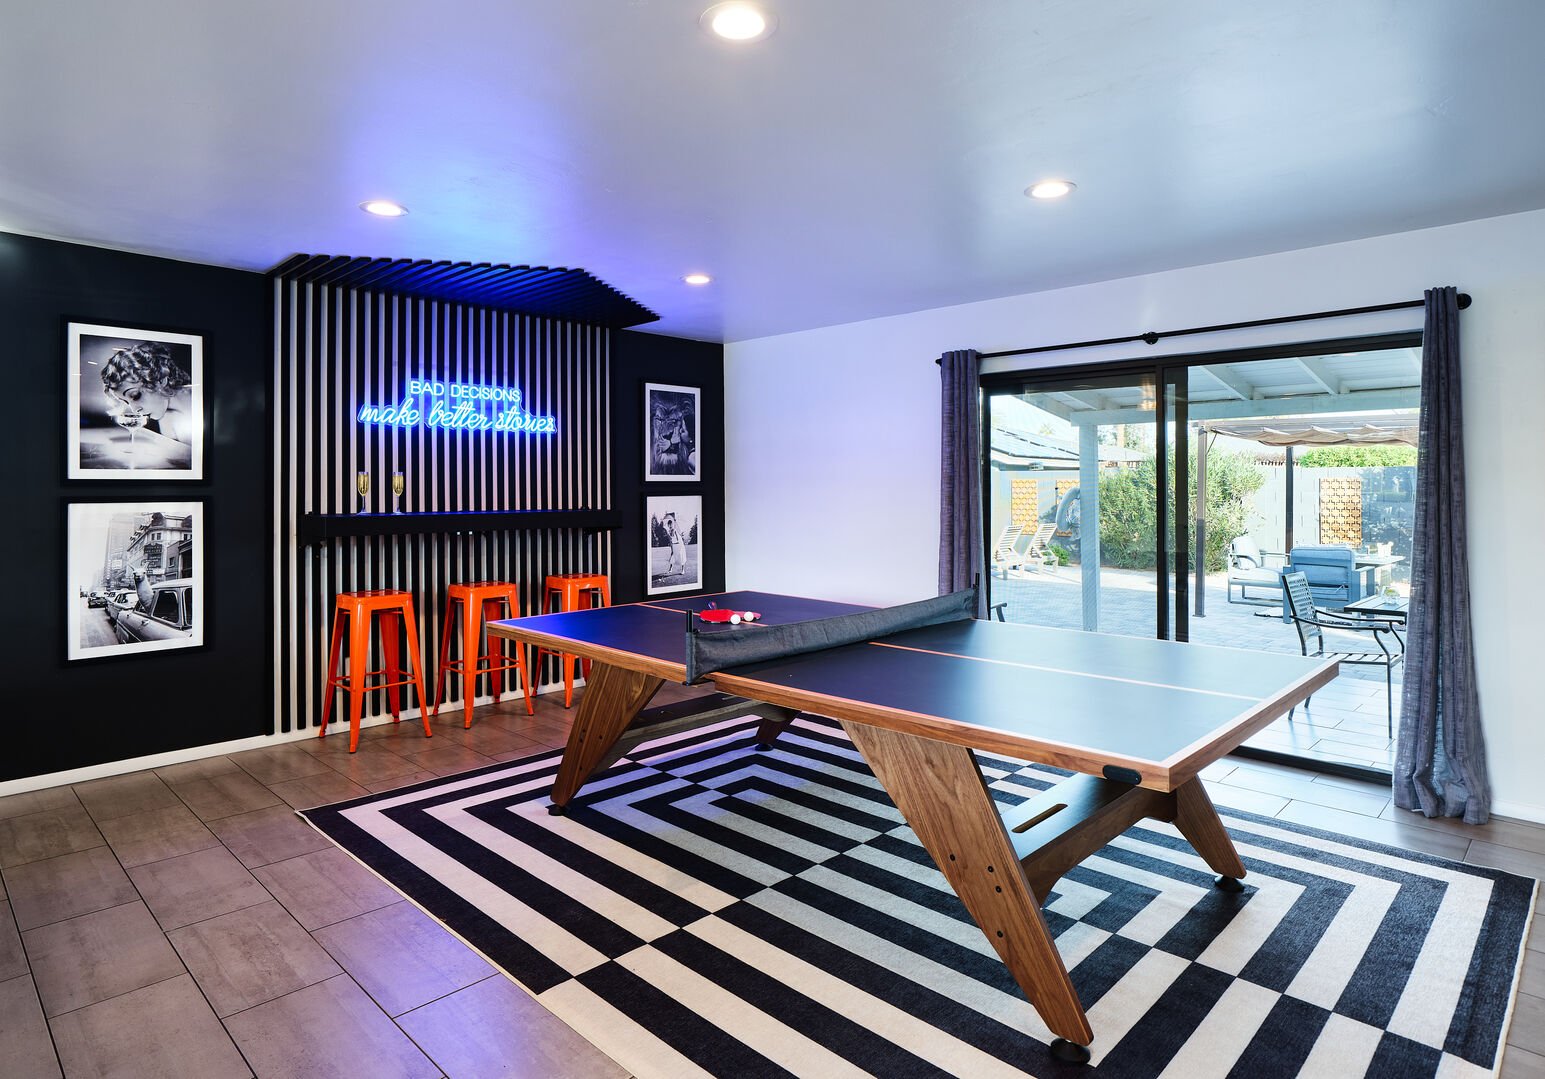 Ping pong table with custom wall bar, neon sign, and designer decor.